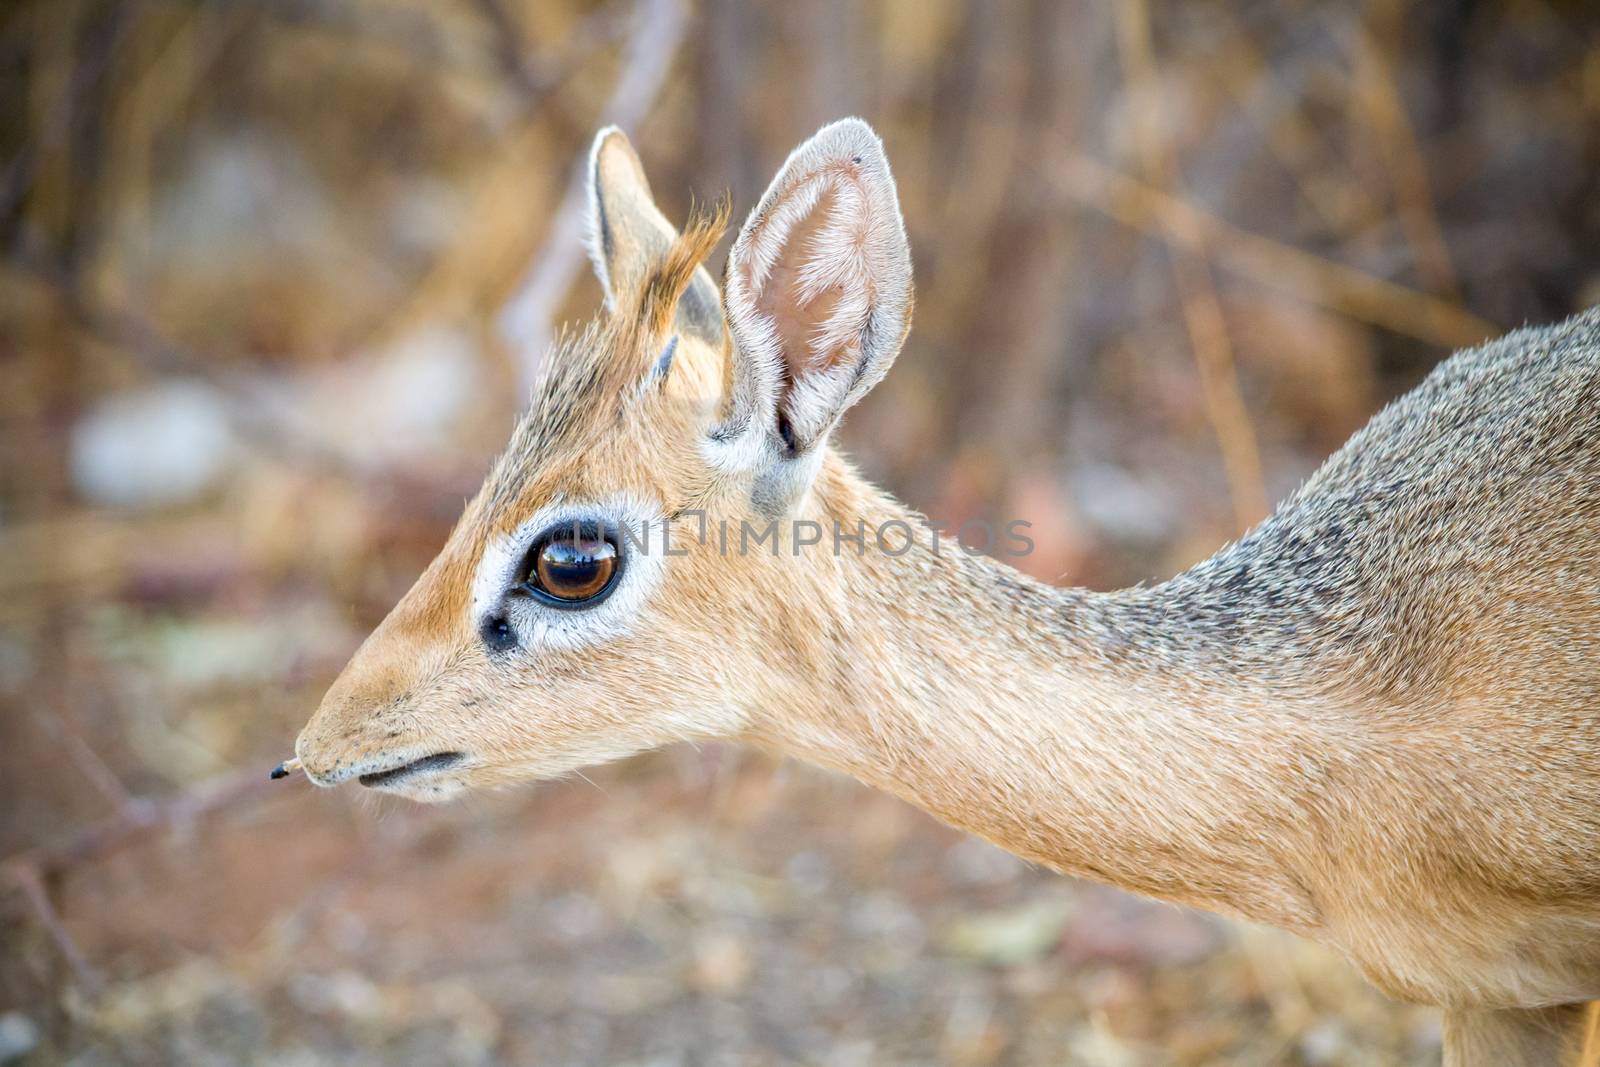 Dik-dik close-up: small antelope in the genus Madoqua that live in the bushlands of eastern and southern Africa. Animal wildlife.